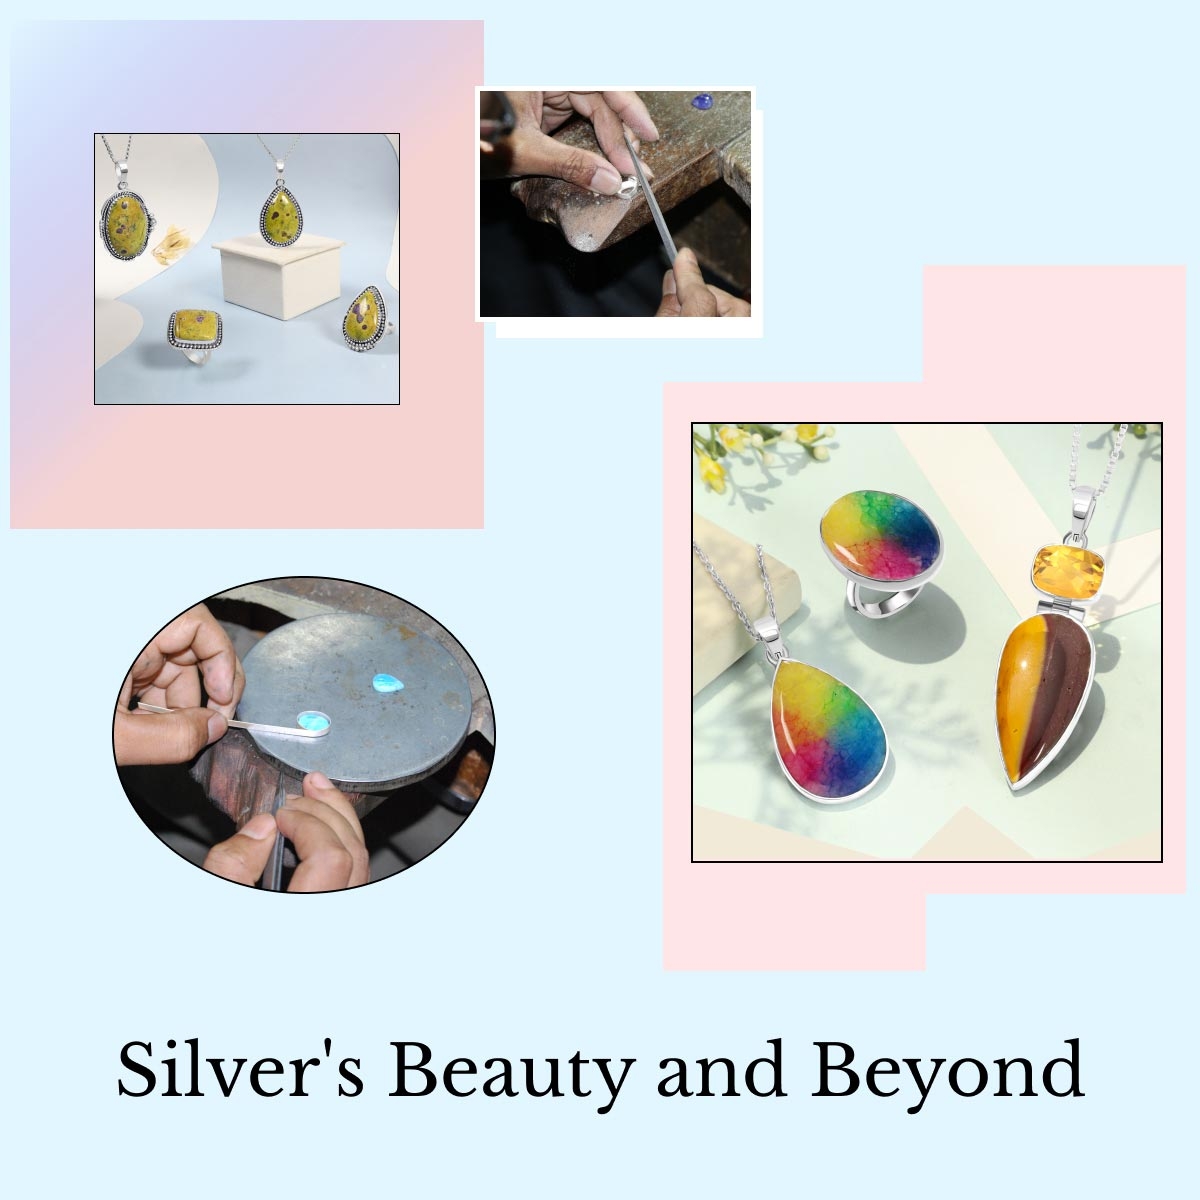 Benefits of silver